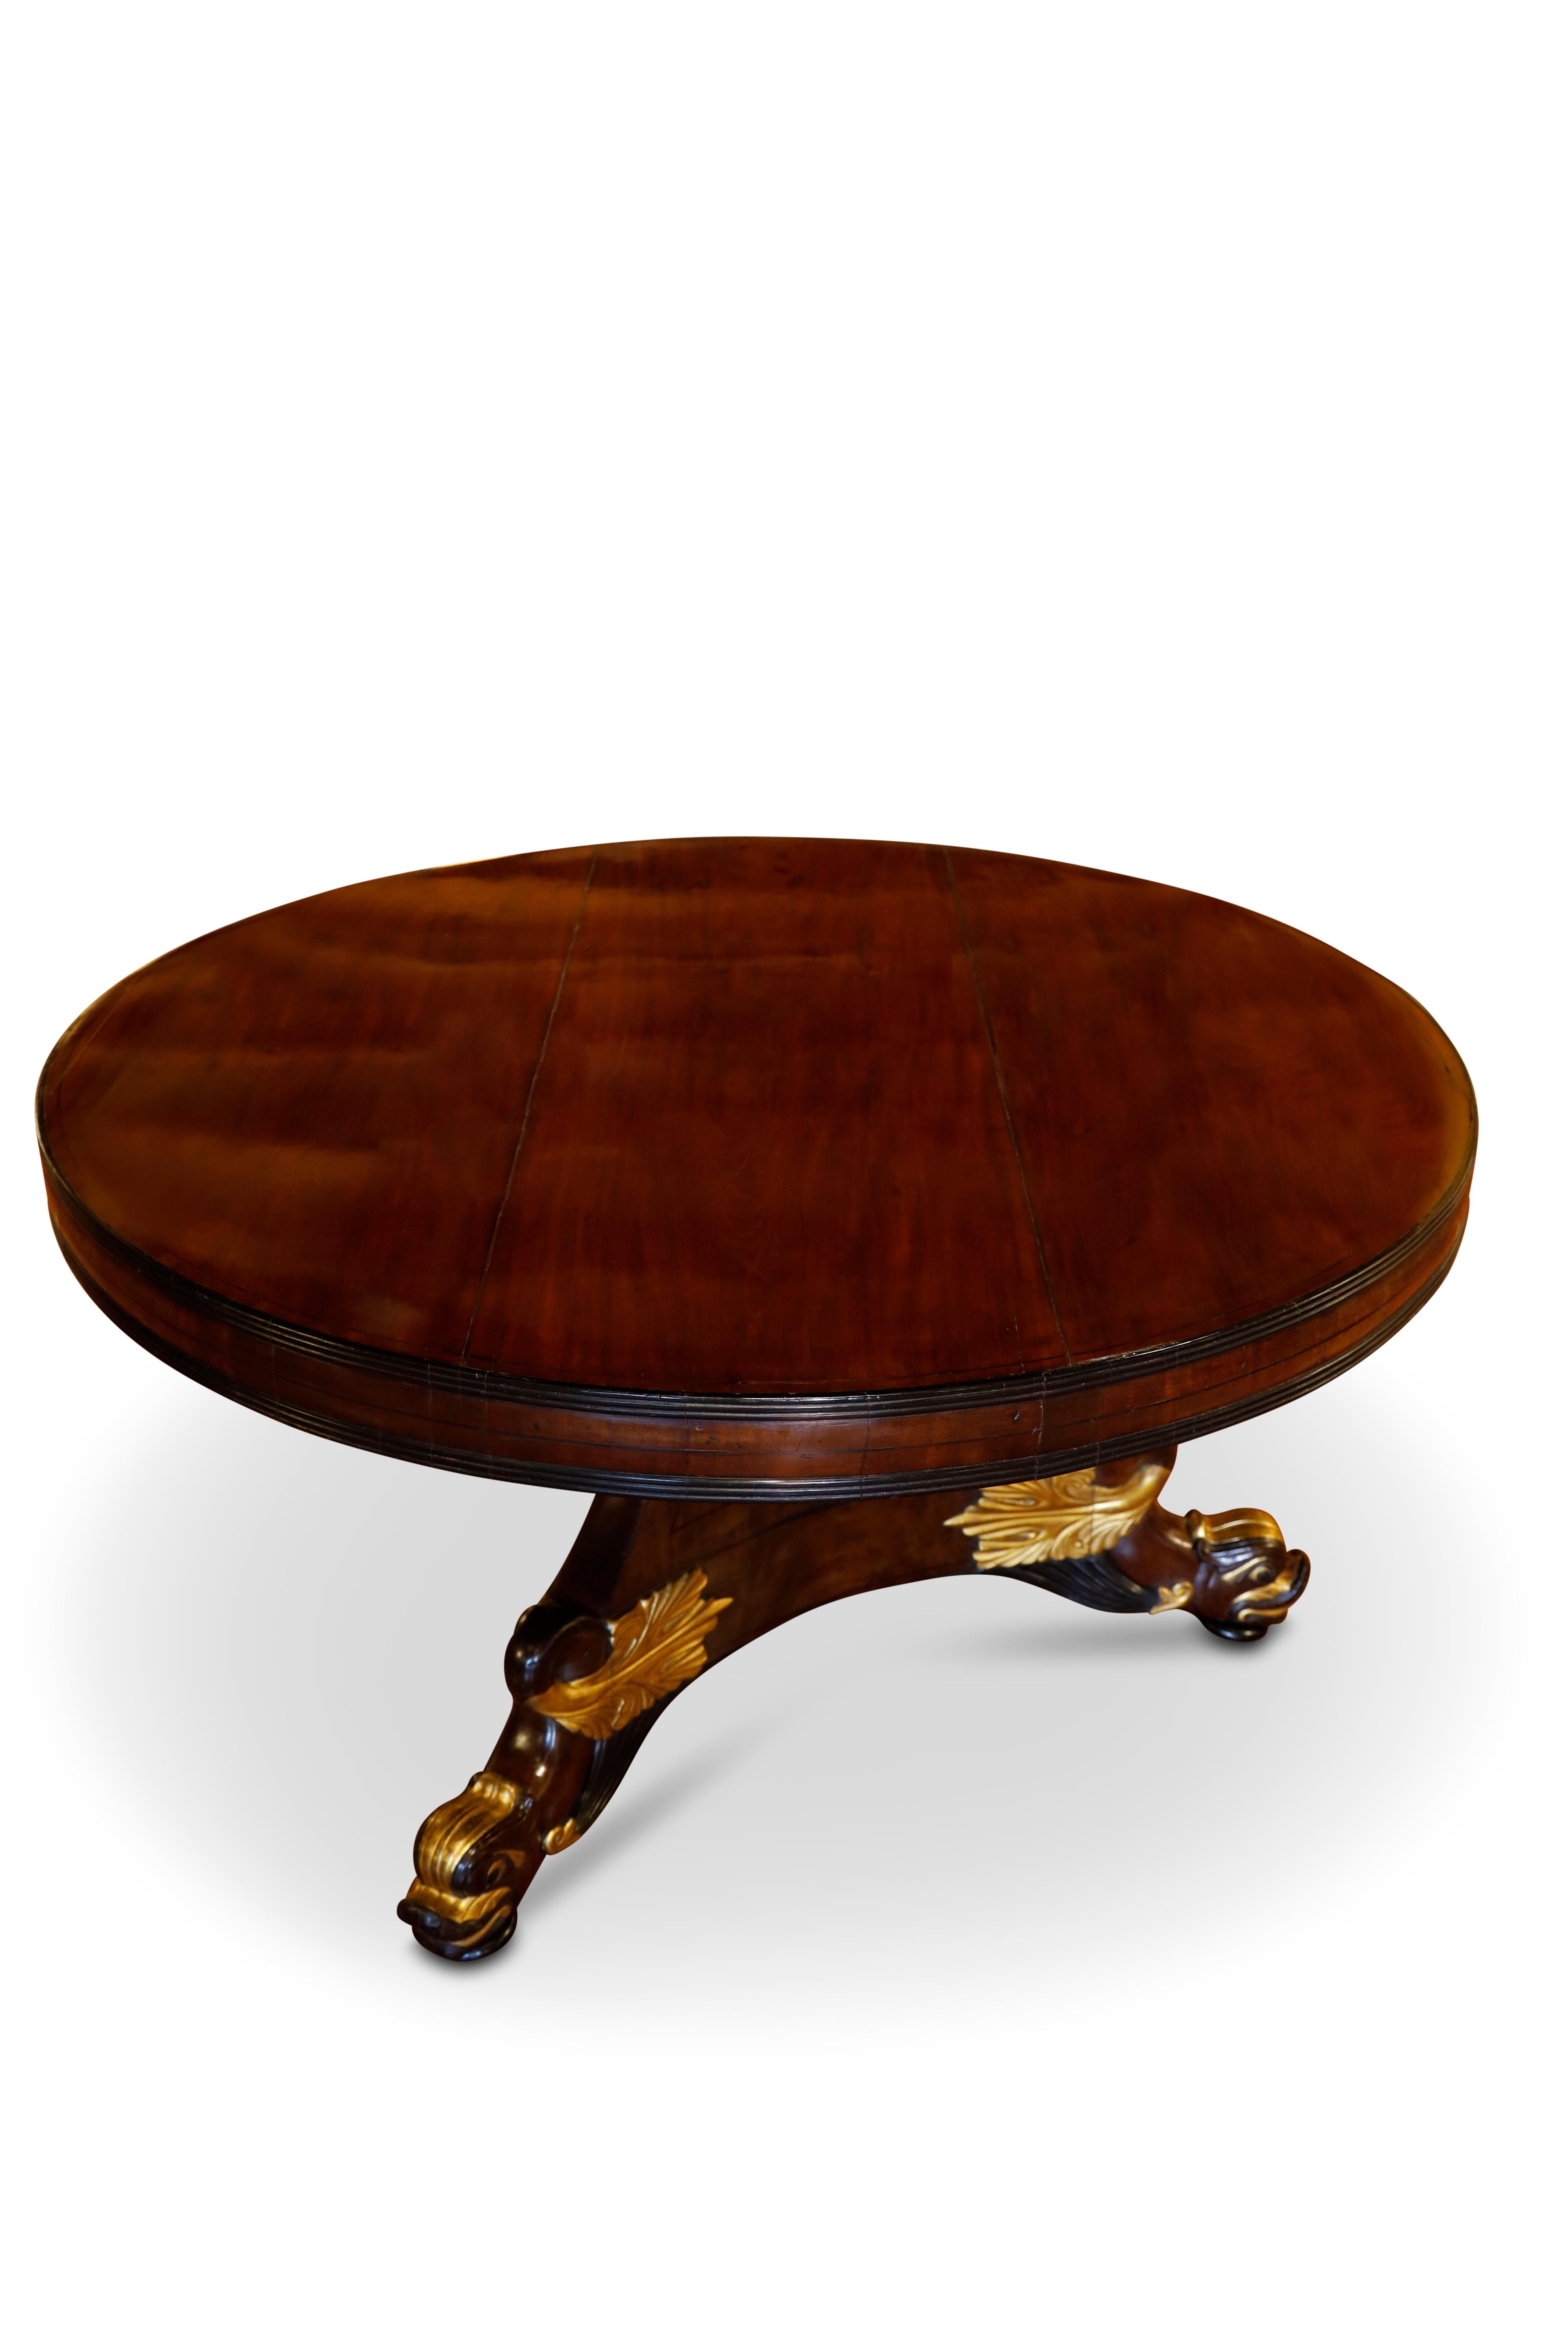 George IV mahogany center table with ebony banding and reeded edge.  Parcel gilt foliate design on triform base resting on carved feet featuring gilt and ebonzied dolphins.